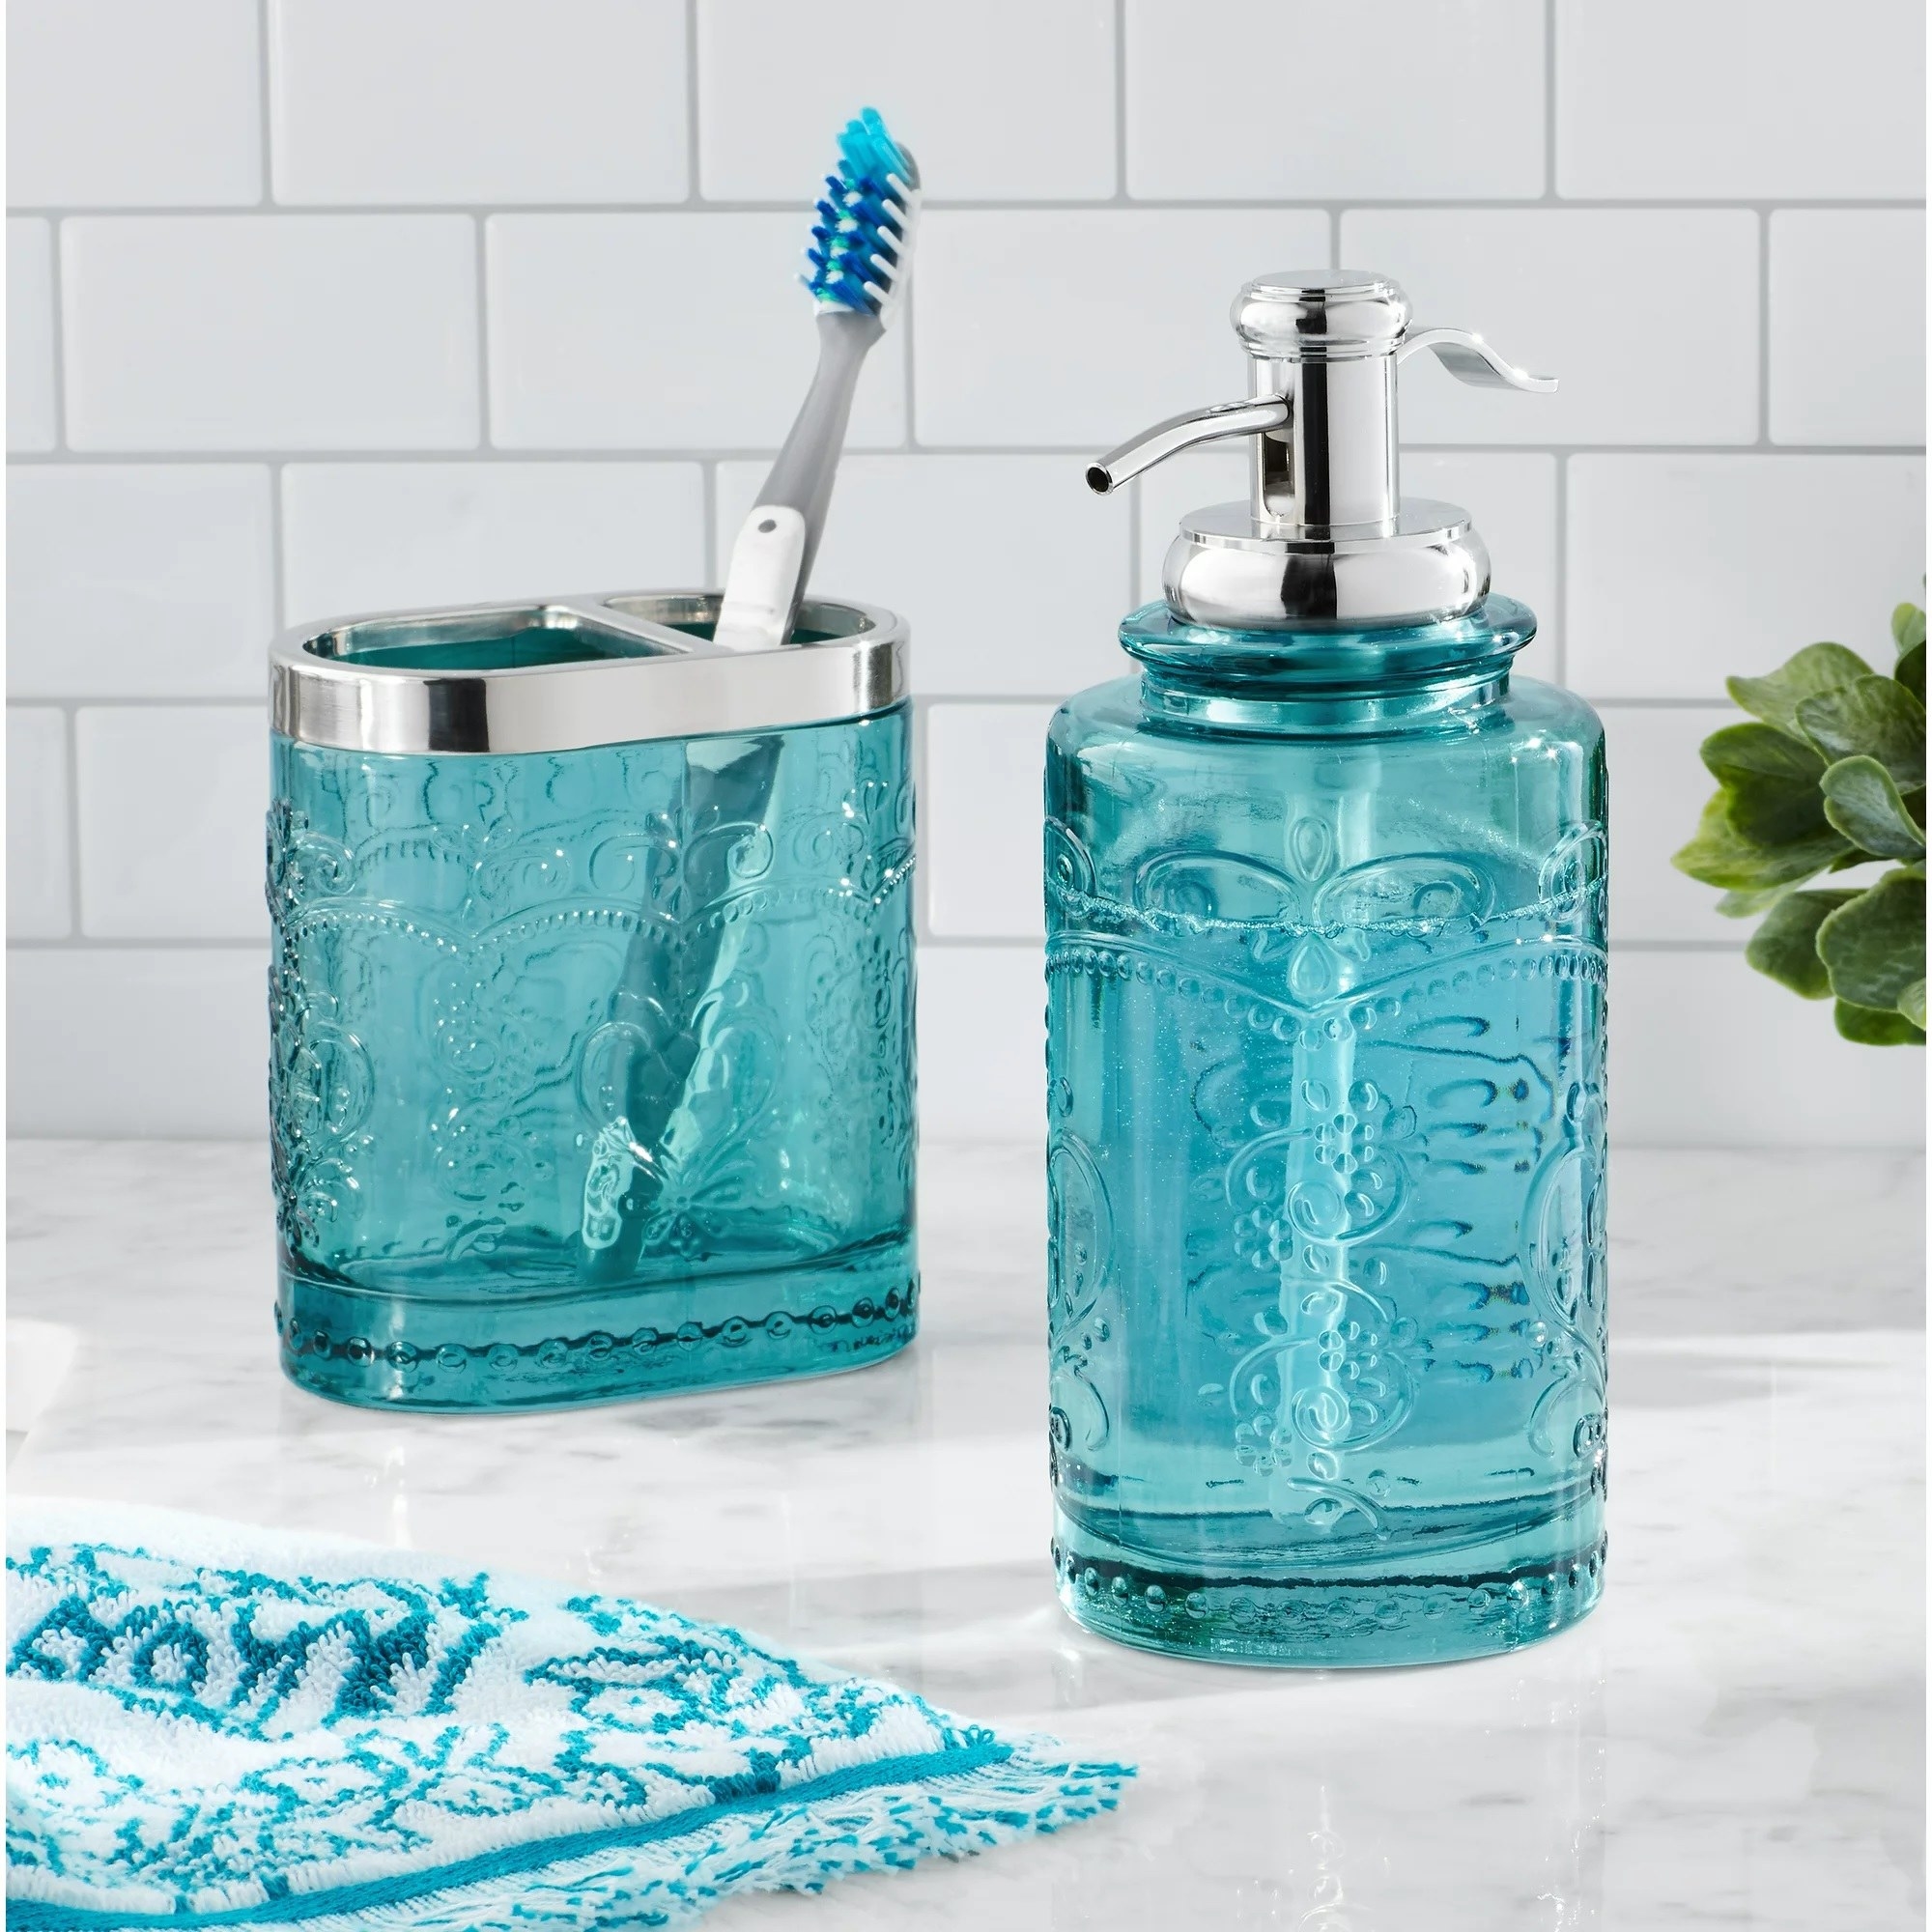 The teal bathroom set on the counter